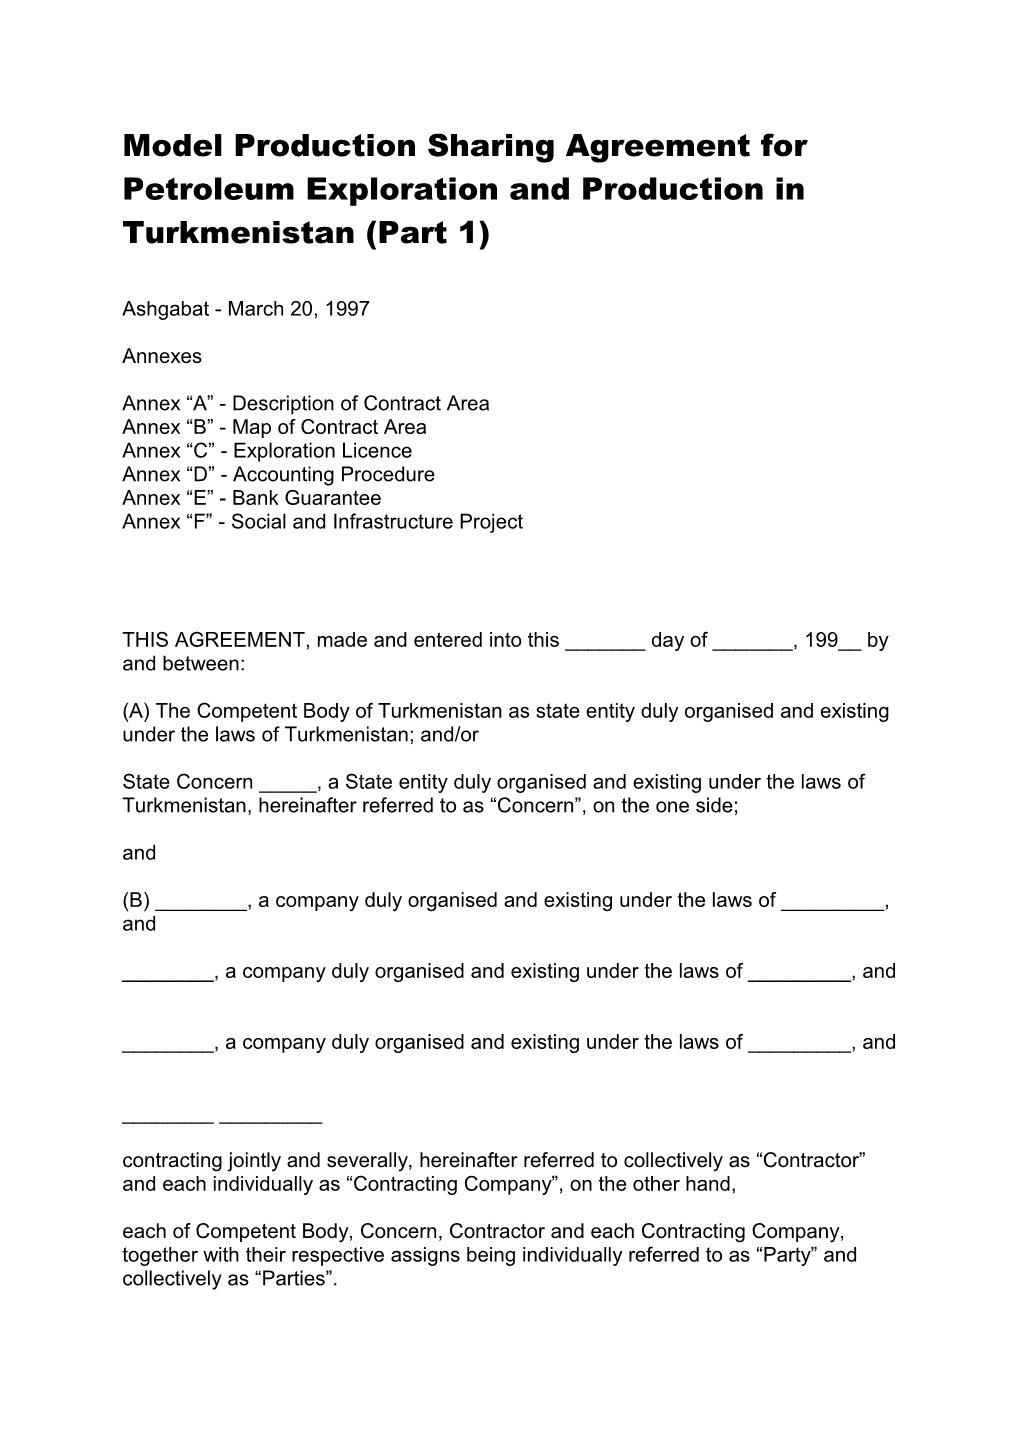 Model Production Sharing Agreement for Petroleum Exploration and Production in Turkmenistan